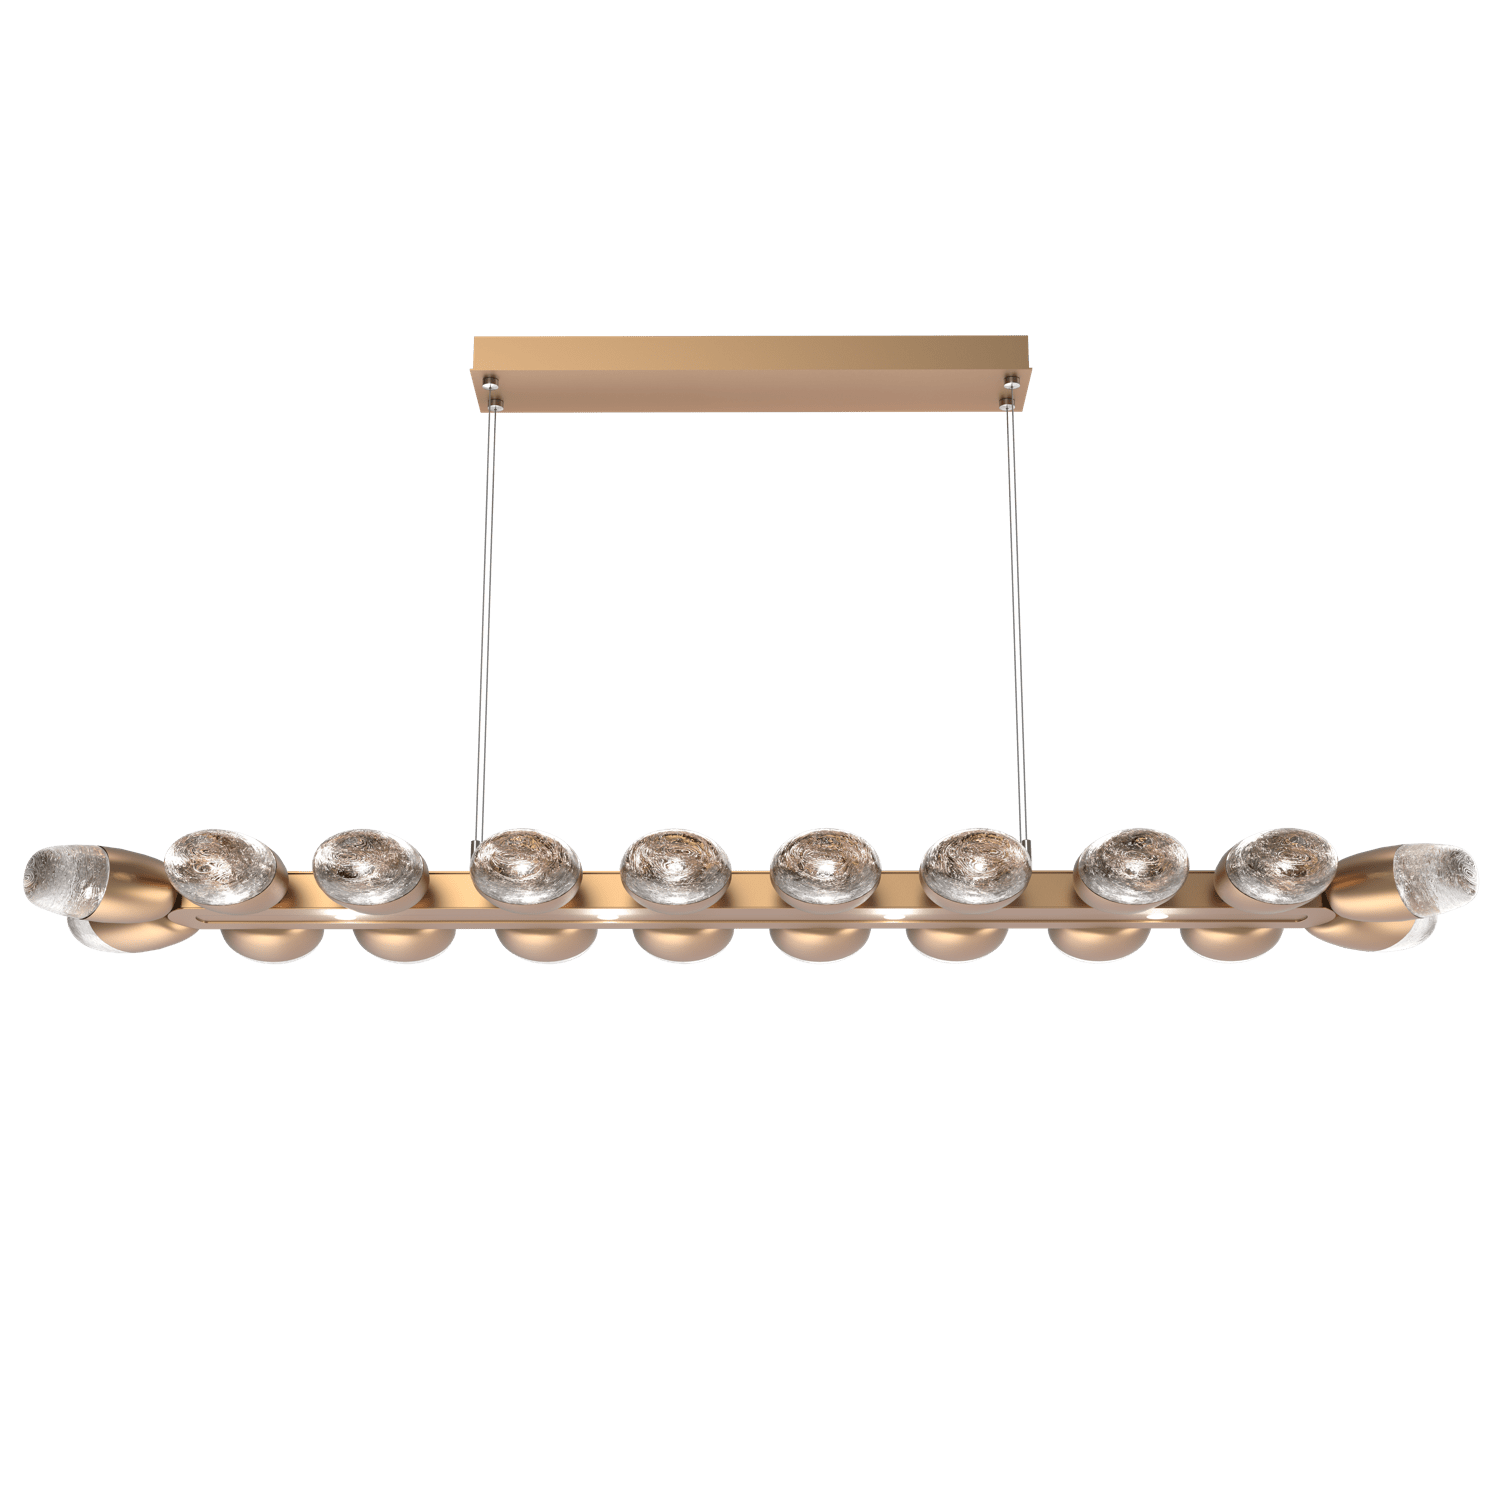 PLB0079-60-NB-Hammerton-Studio-Pebble-60-inch-linear-chandelier-with-novel-brass-finish-and-clear-cast-glass-shades-and-LED-lamping